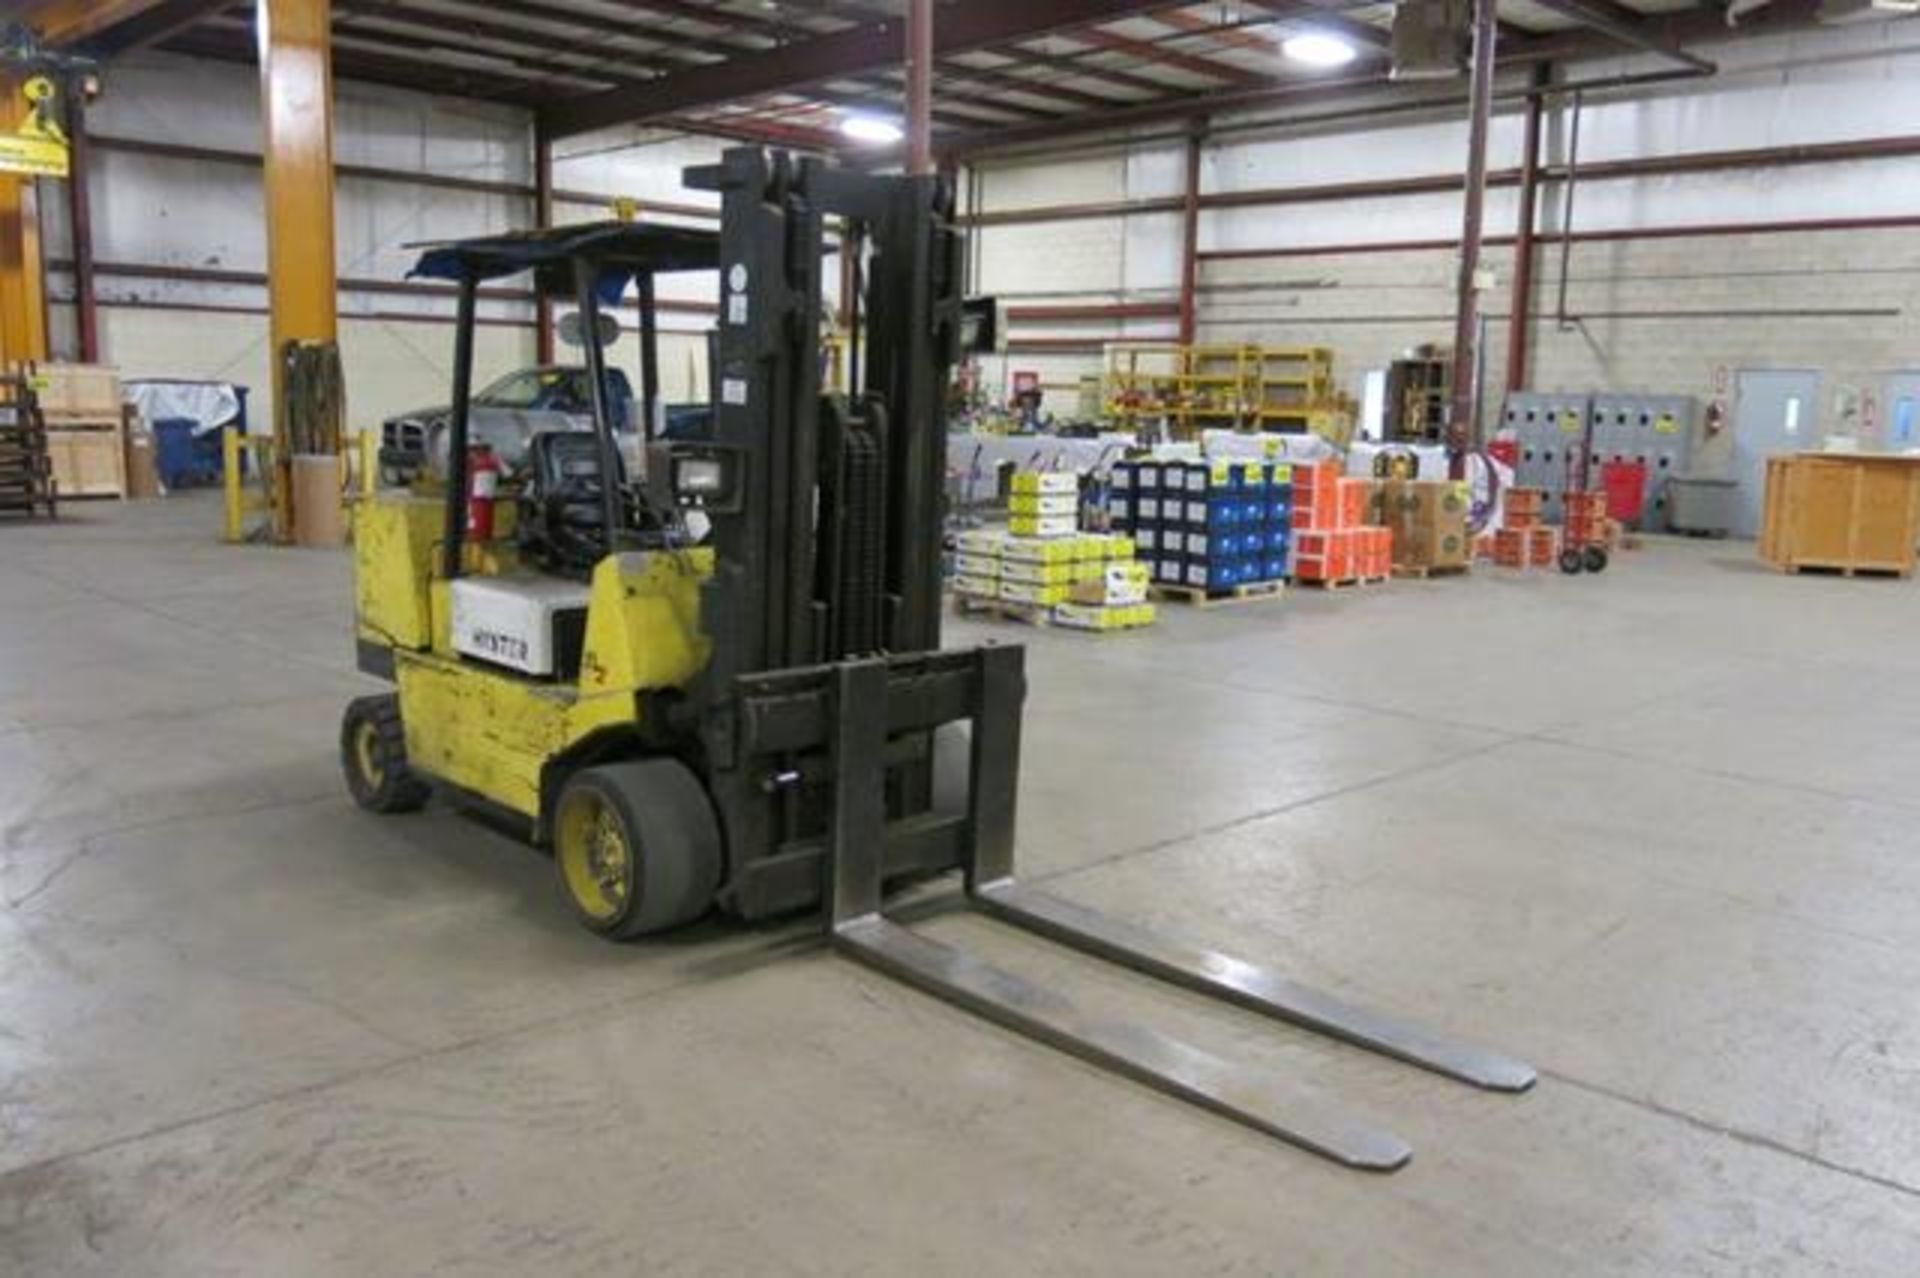 HYSTER, S120XLS, 11,000 LBS, 3 STAGE, LPG FORKLIFT, SIDESHIFT, 206.5" MAXIMUM LIFT 2,446 HOURS, S/ - Image 6 of 11